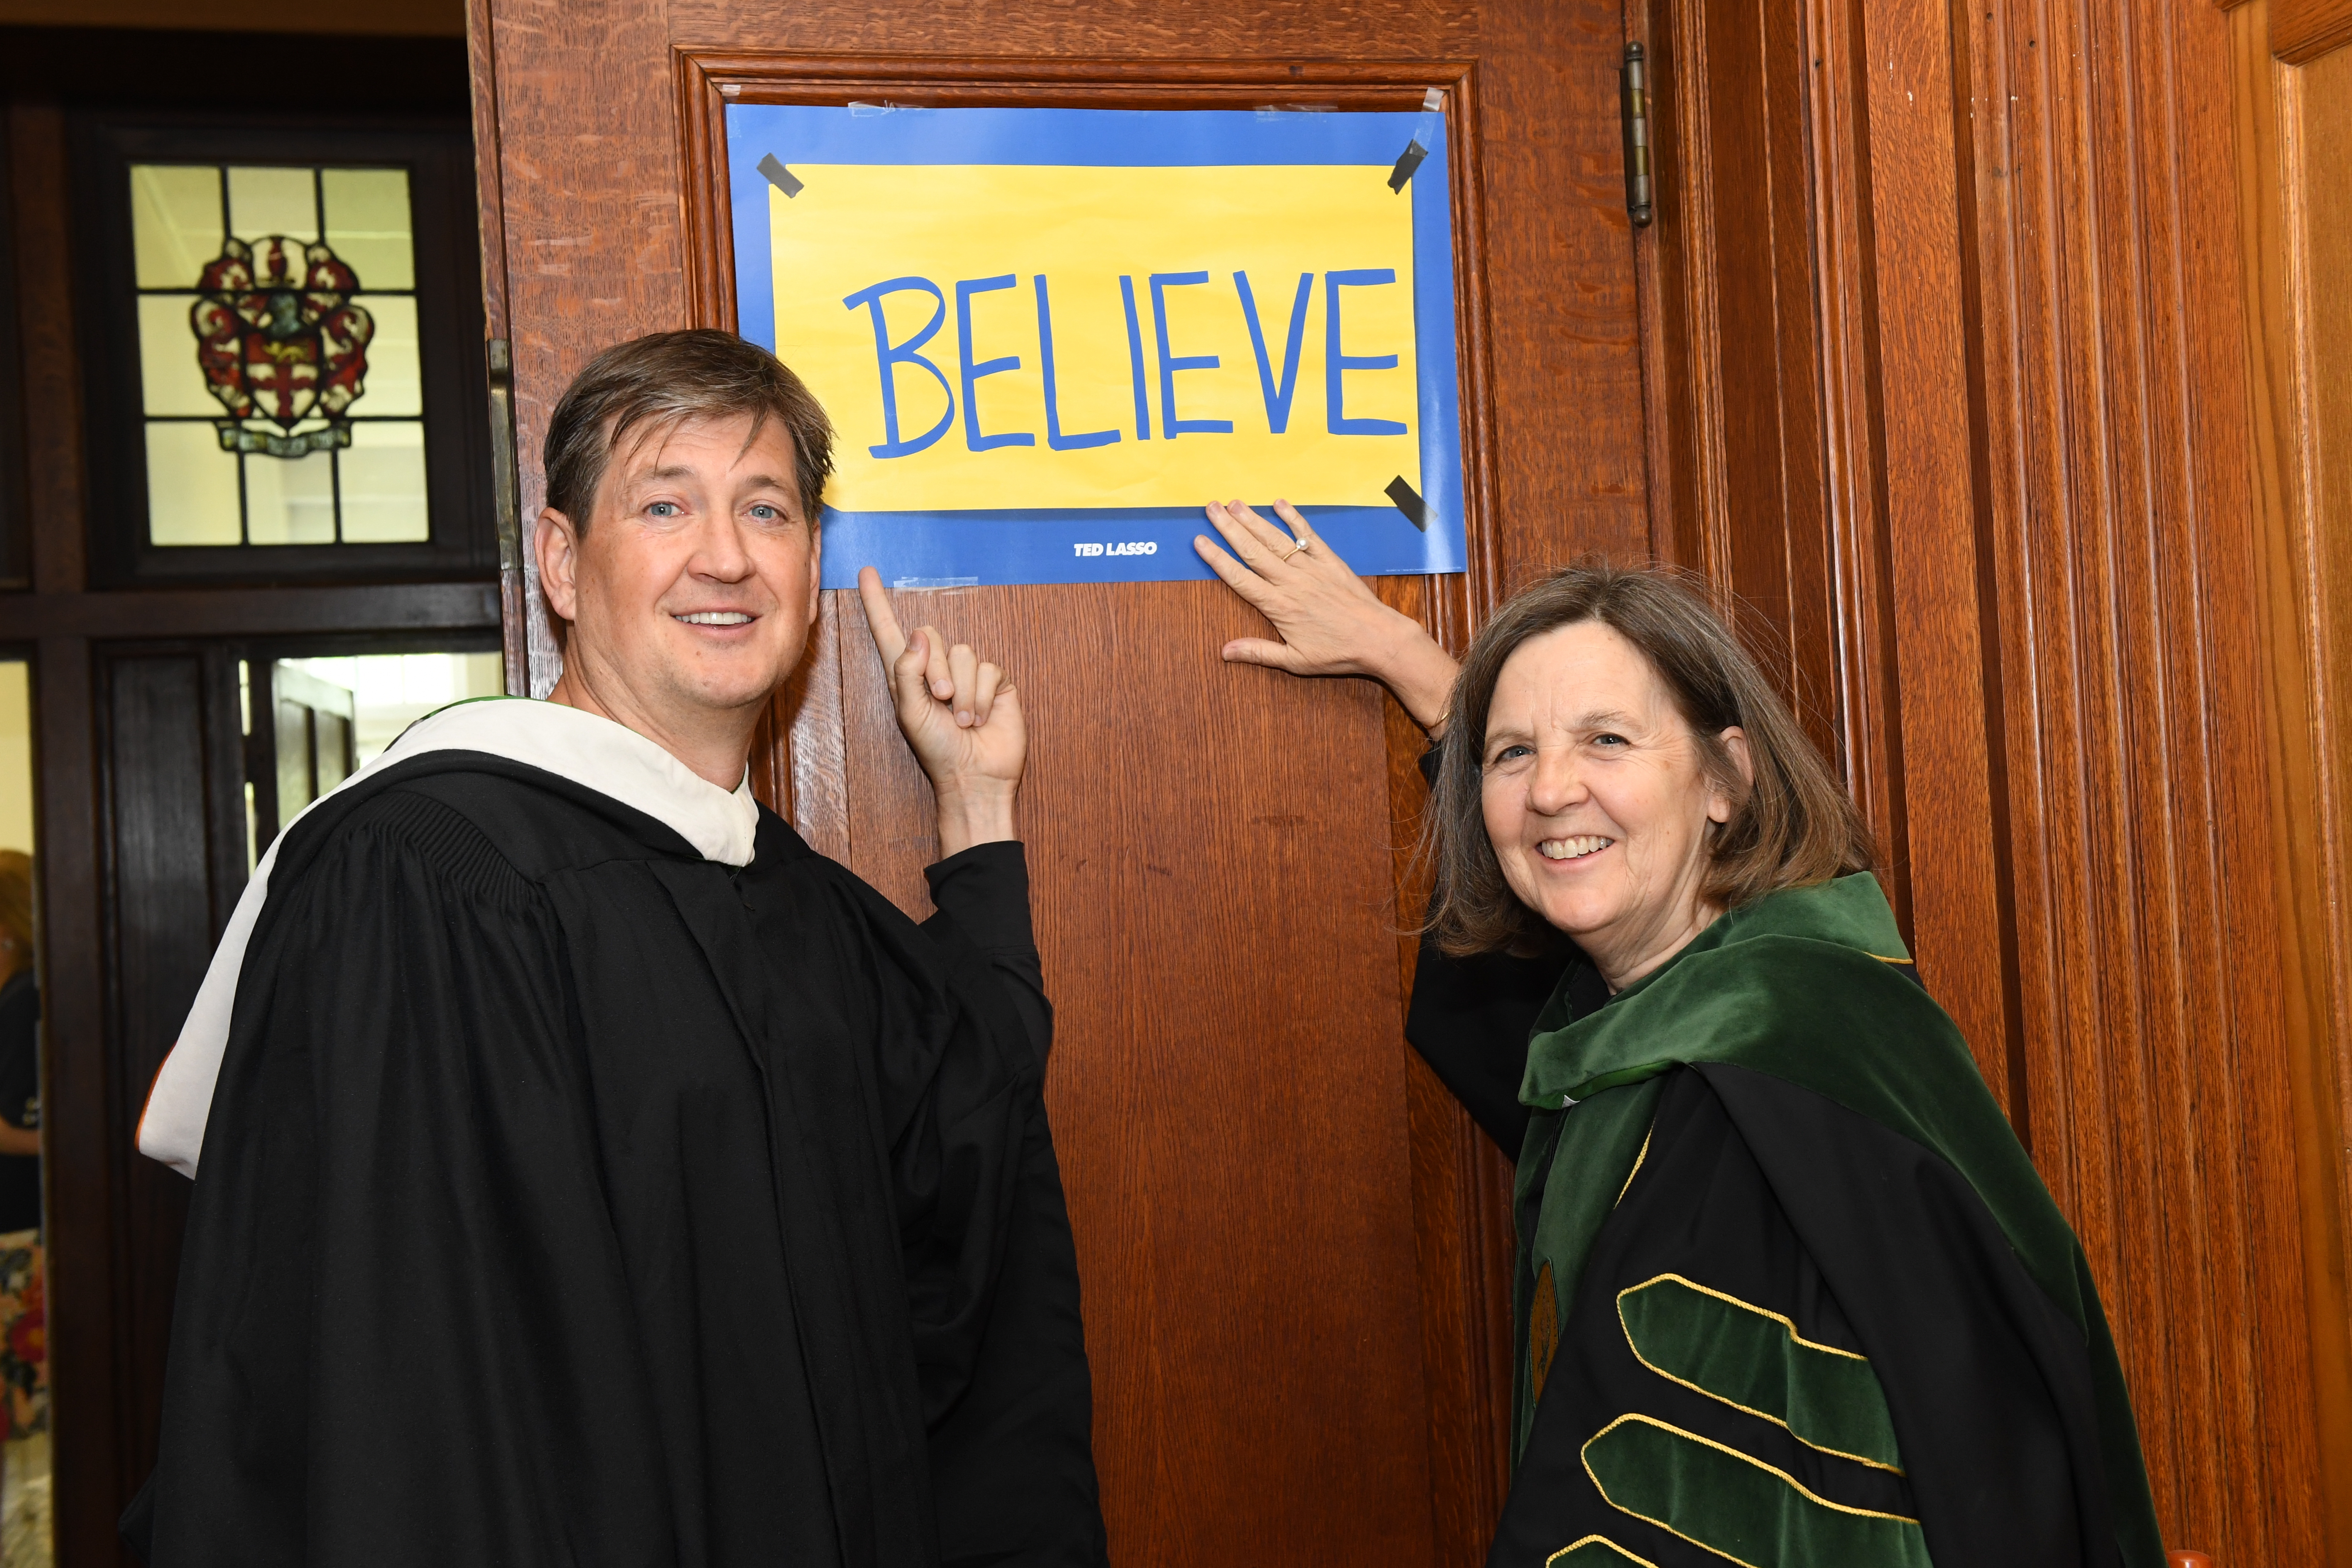 Bill Lawrence and Cristle Collins Judd pose under a "Believe" sign